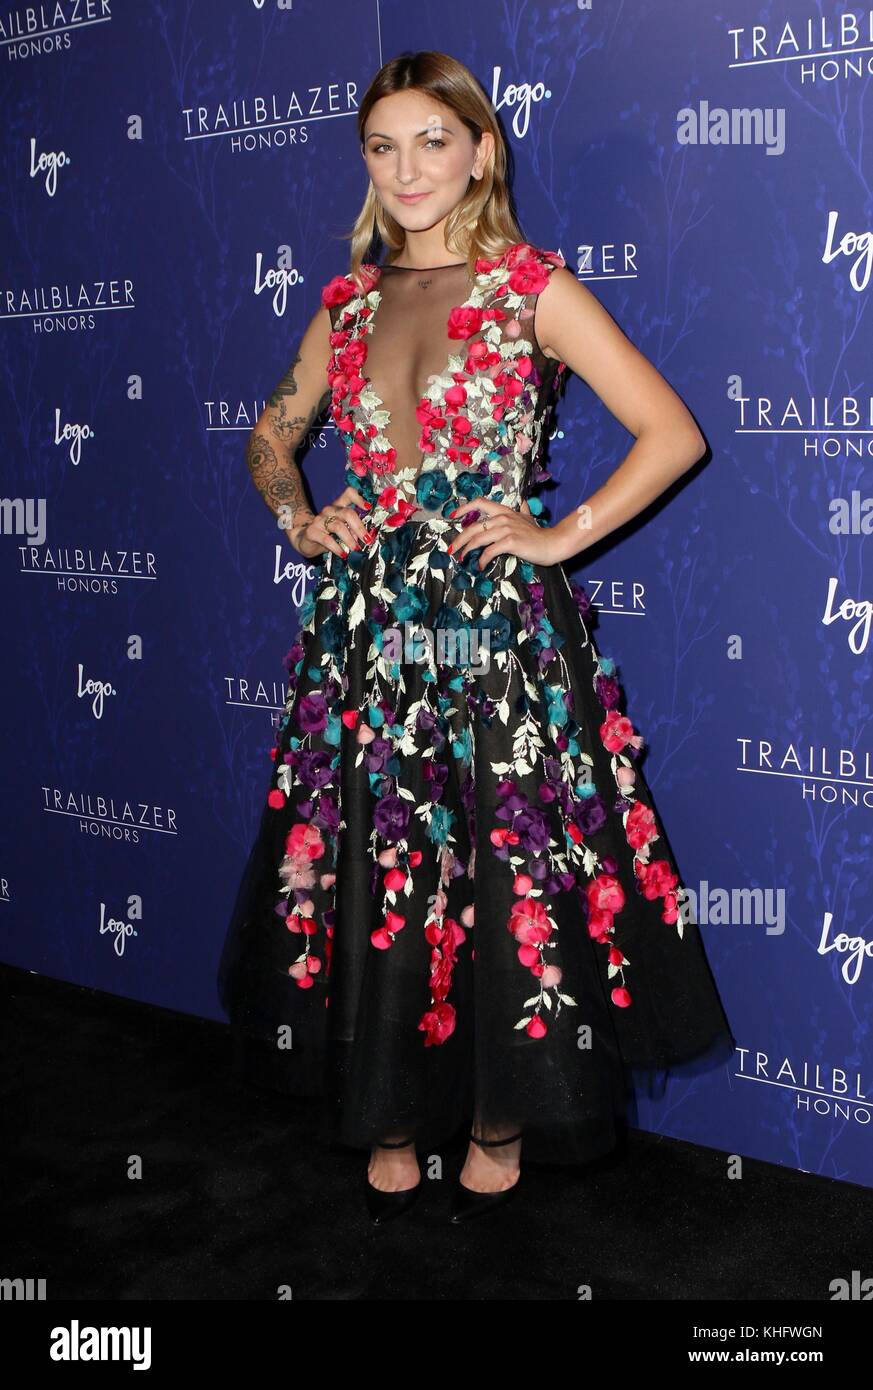 NEW YORK, NY - JUNE 22: Julia Michaels attends Logo's 2017 Trailblazer Honors Awards show at Cathedral of St. John the Divine on June 22, 2017 in New York City.    People:  Julia Michaels  Transmission Ref:  MNC76 Stock Photo